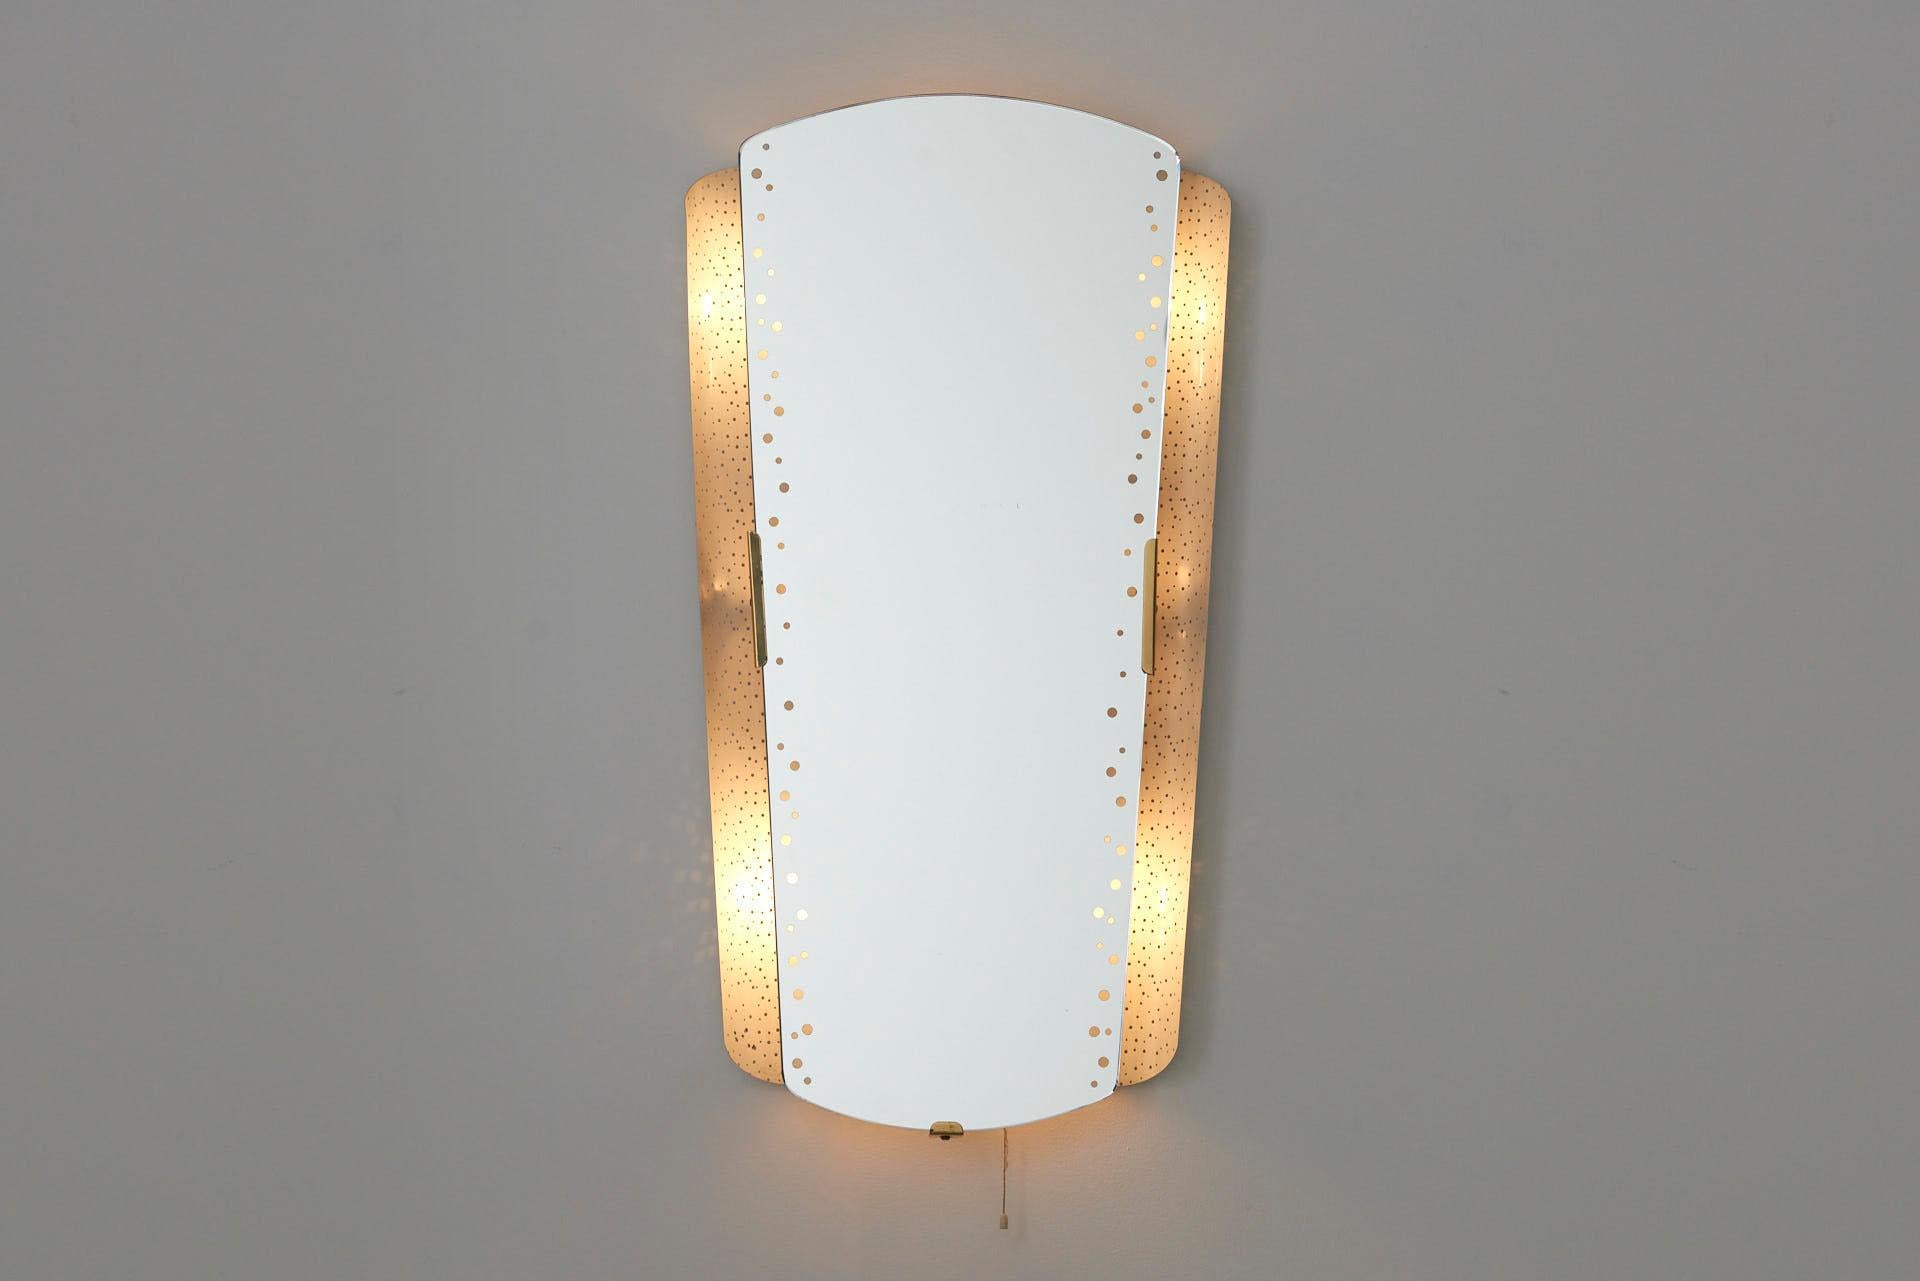 A large backlit mirror, held by brass brackets. The light is reflected by a curved perforated plate, and shines through the dots in the mirror. Designed in the 1950s by Ernest Igl and made by Hillebrand Leuchten in Germany. The mirror holds 6 E27